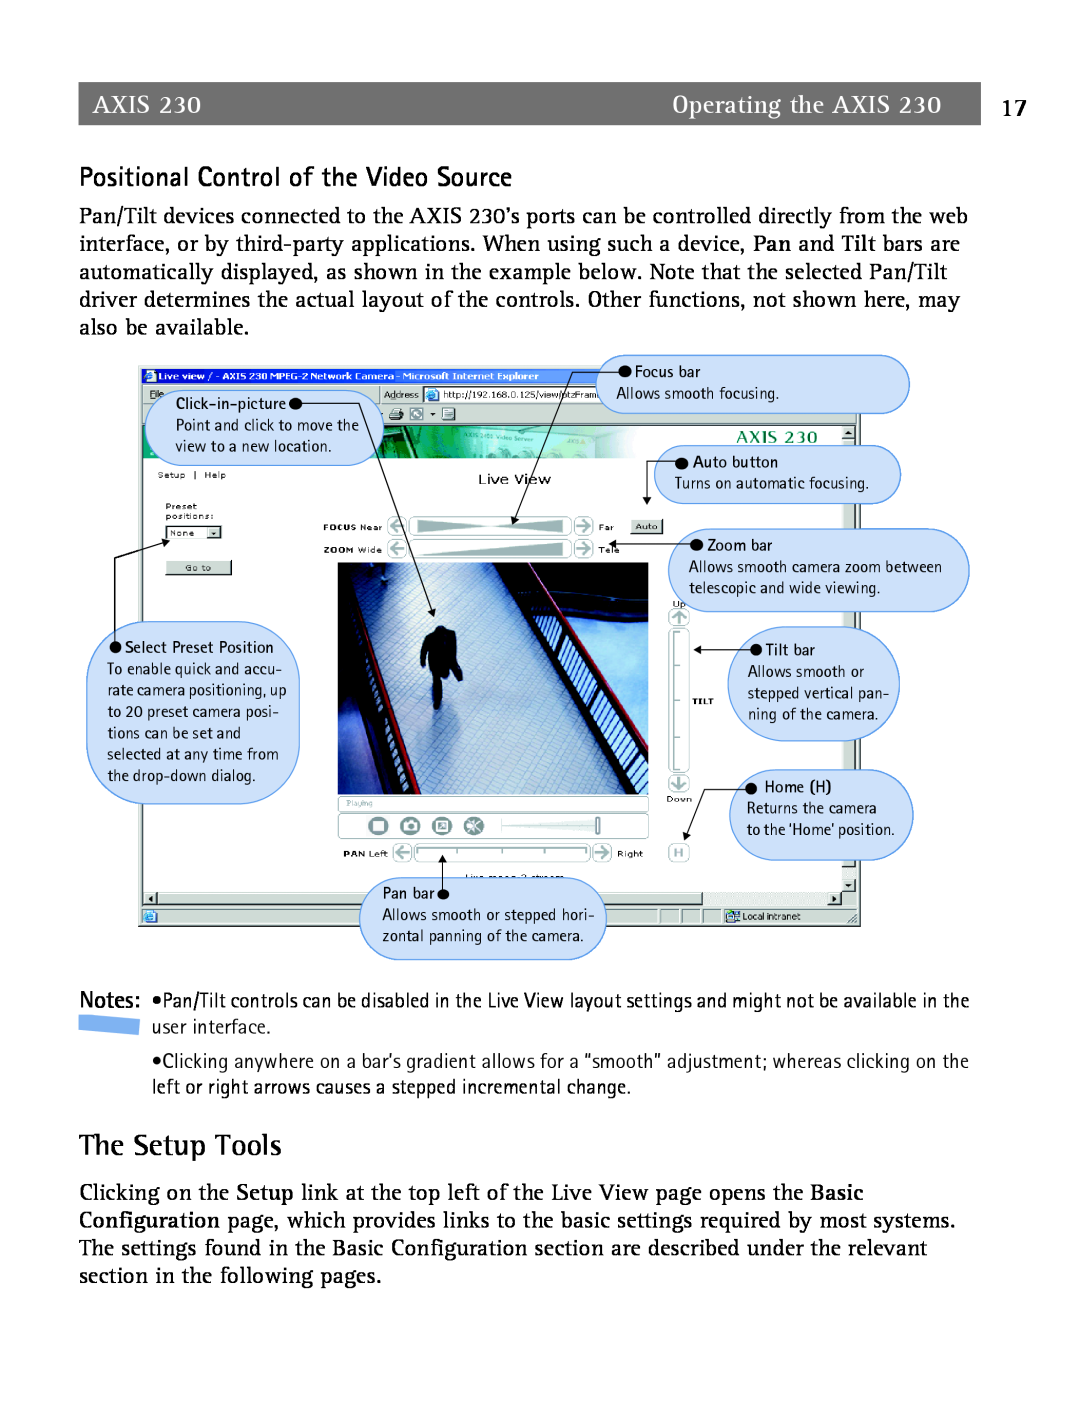 Axis Communications 2 user manual The Setup Tools, Positional Control of the Video Source, Axis, Operating the AXIS 